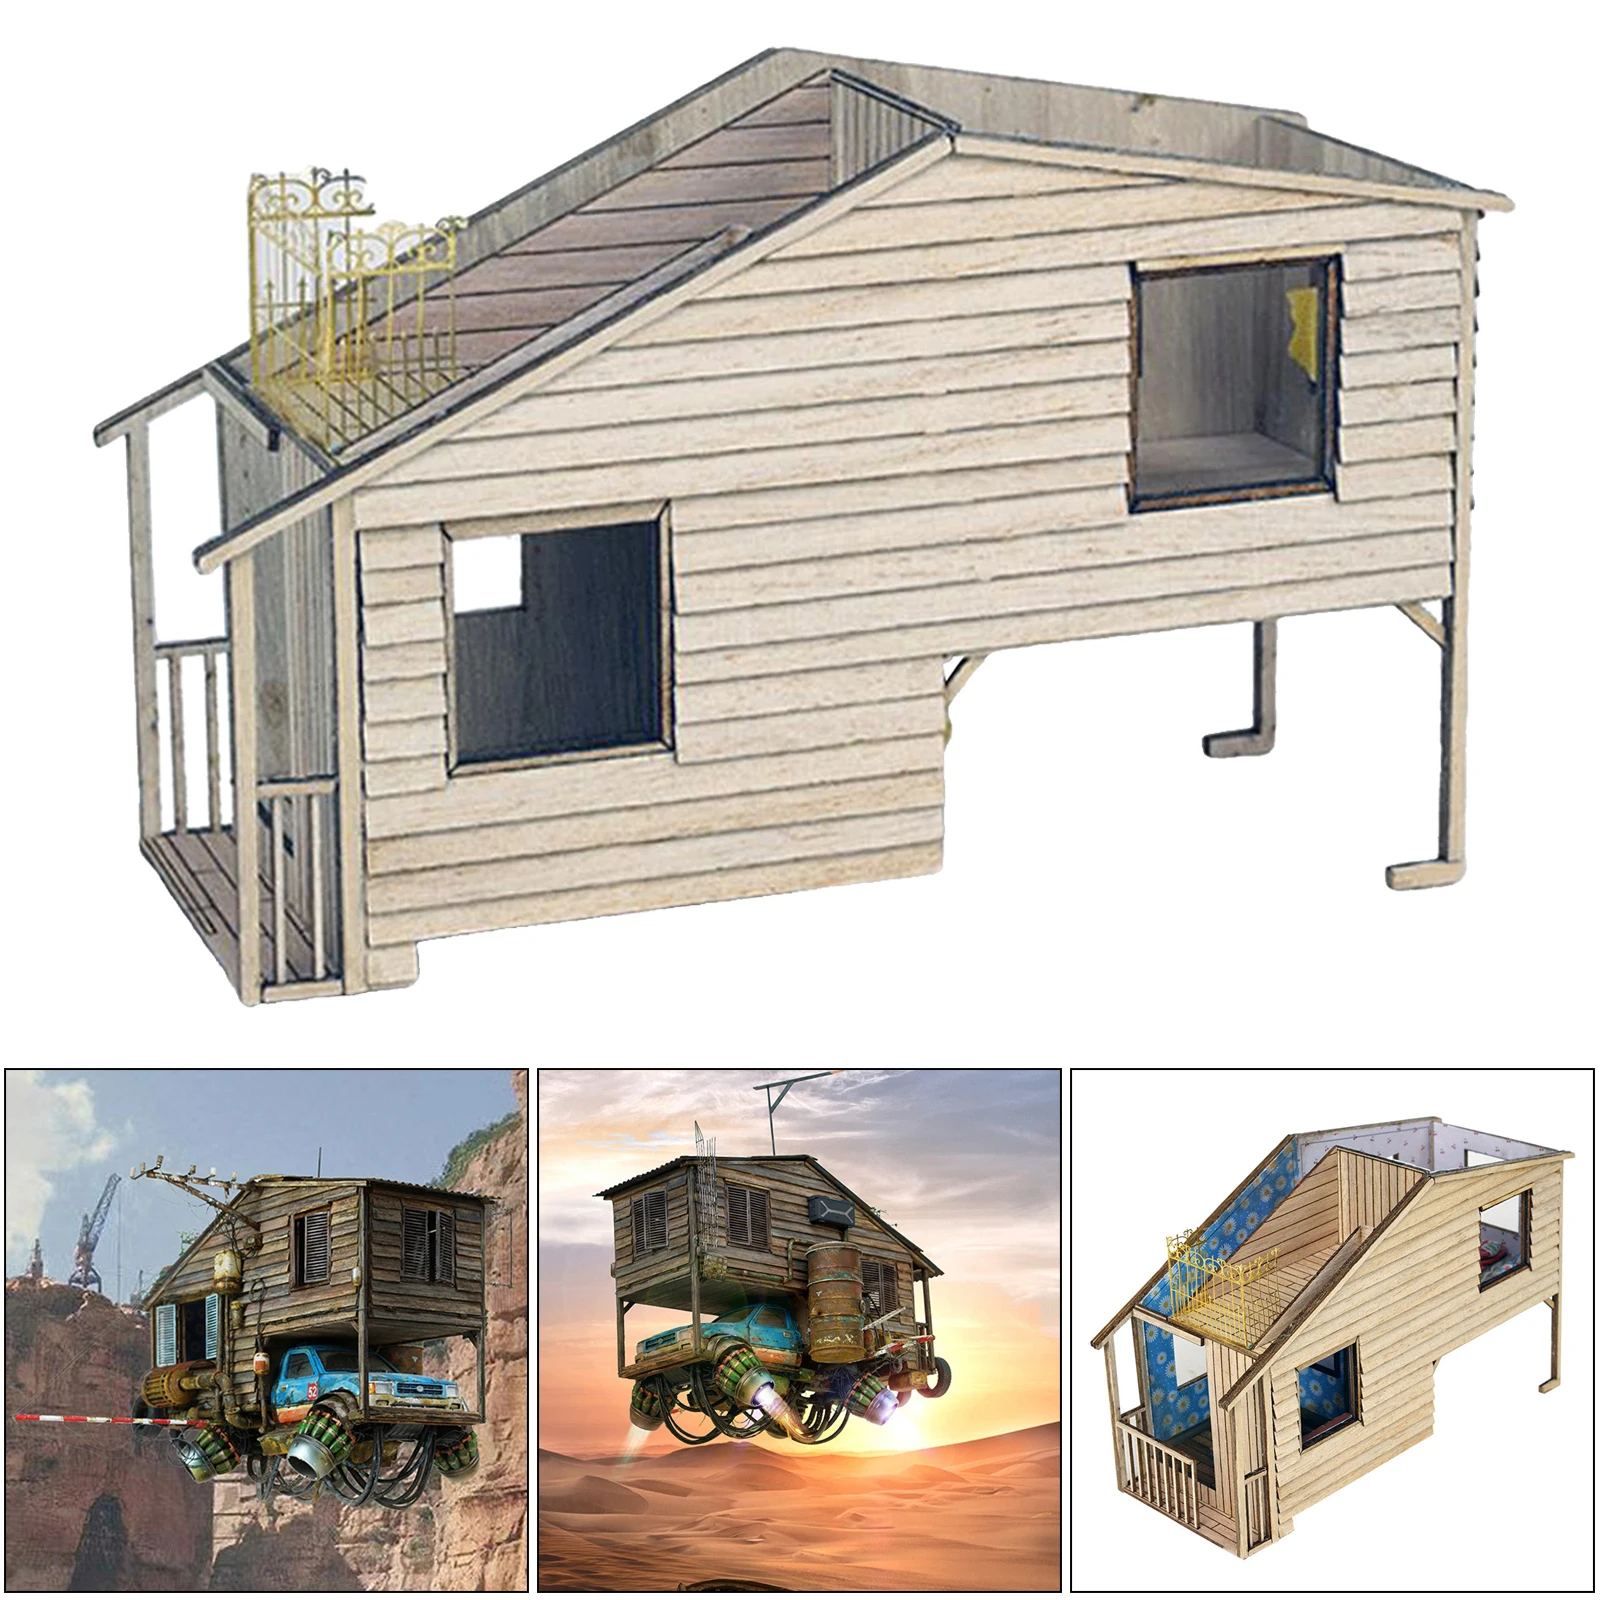 Handmade DIY Dioramas Building Model Kits,European Wooden House,1:35 Scale Mini Sand Table Architecture Scene Layouts